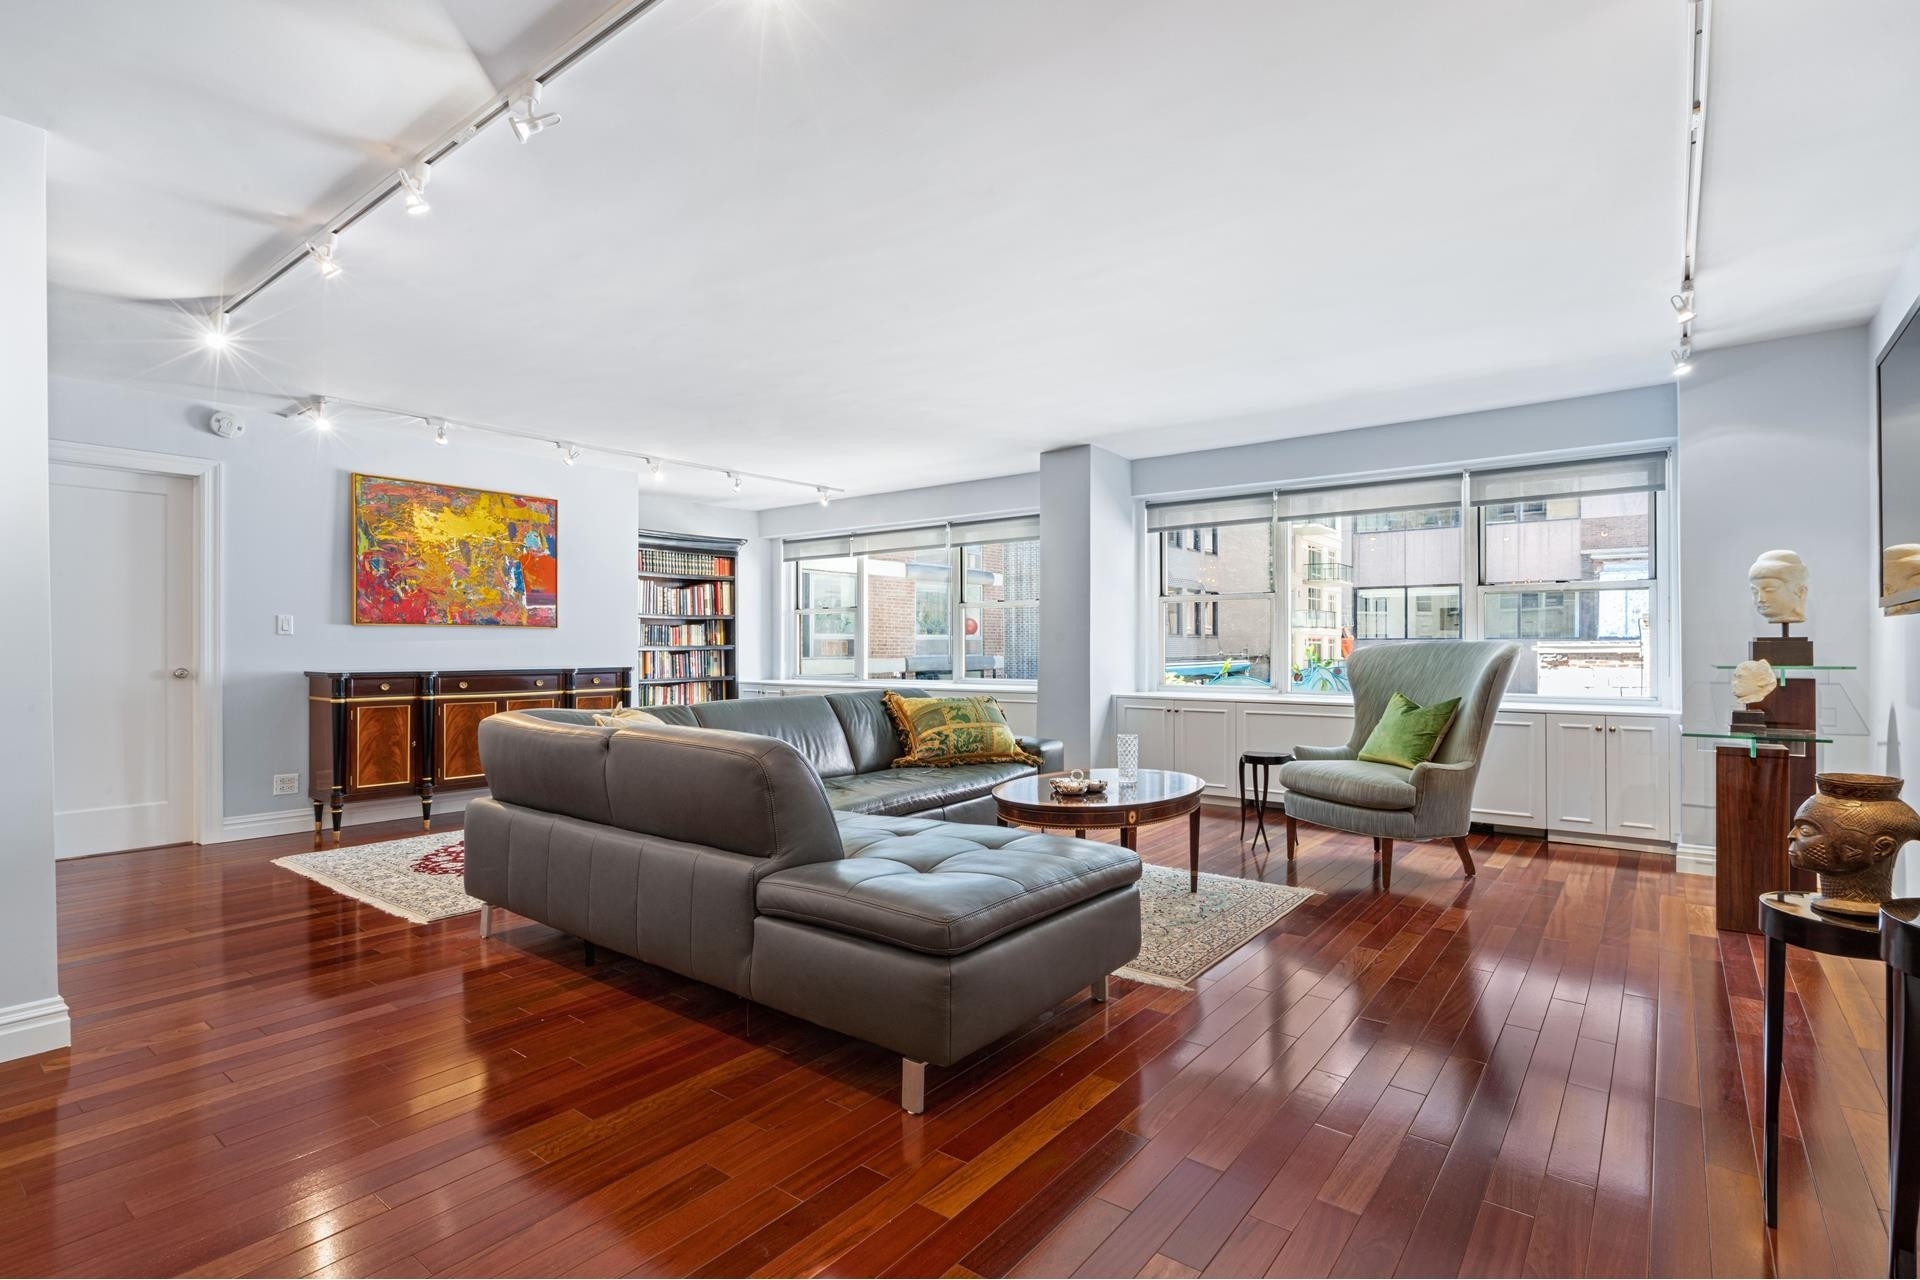 Co-op Properties for Sale at 136 E 56TH ST, 4MN Midtown East, New York, NY 10022